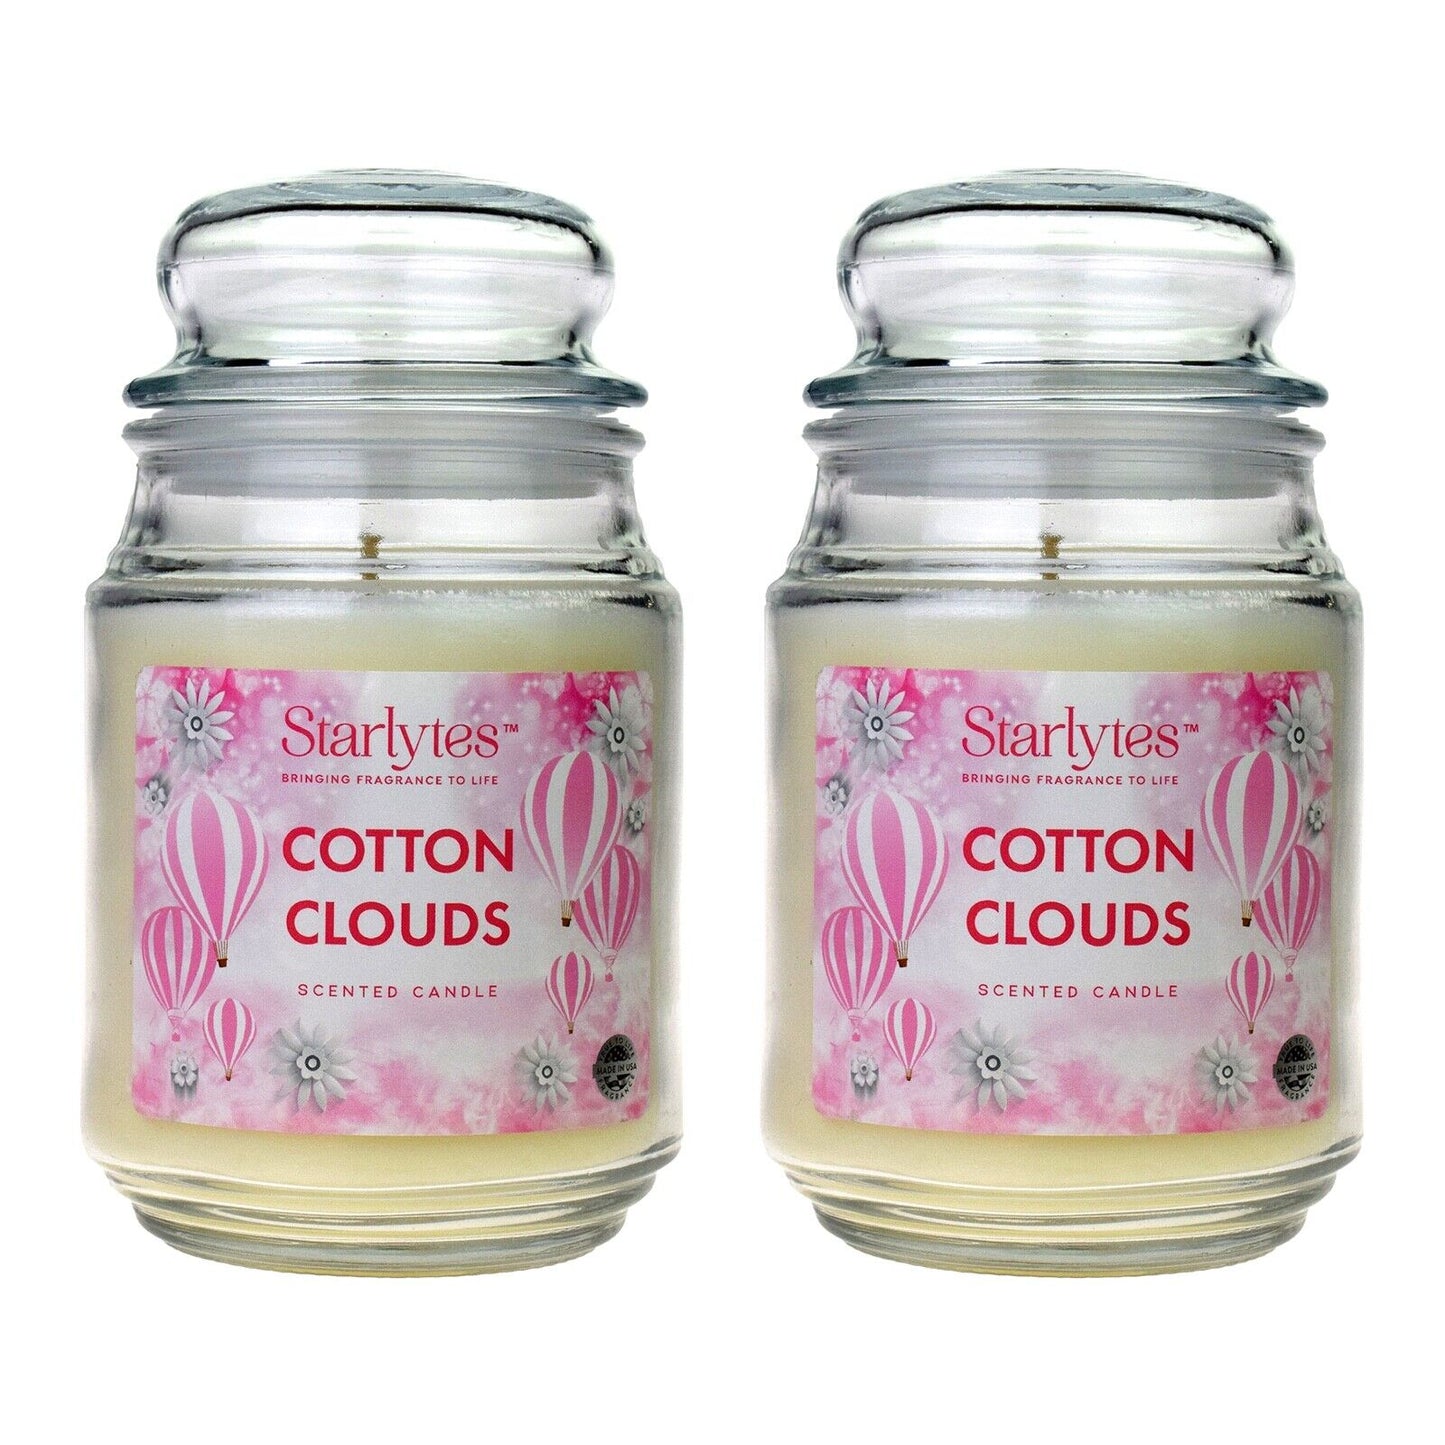 2 Starlytes Cotton Clouds Scented Candle 510g 125hr BURN TIME